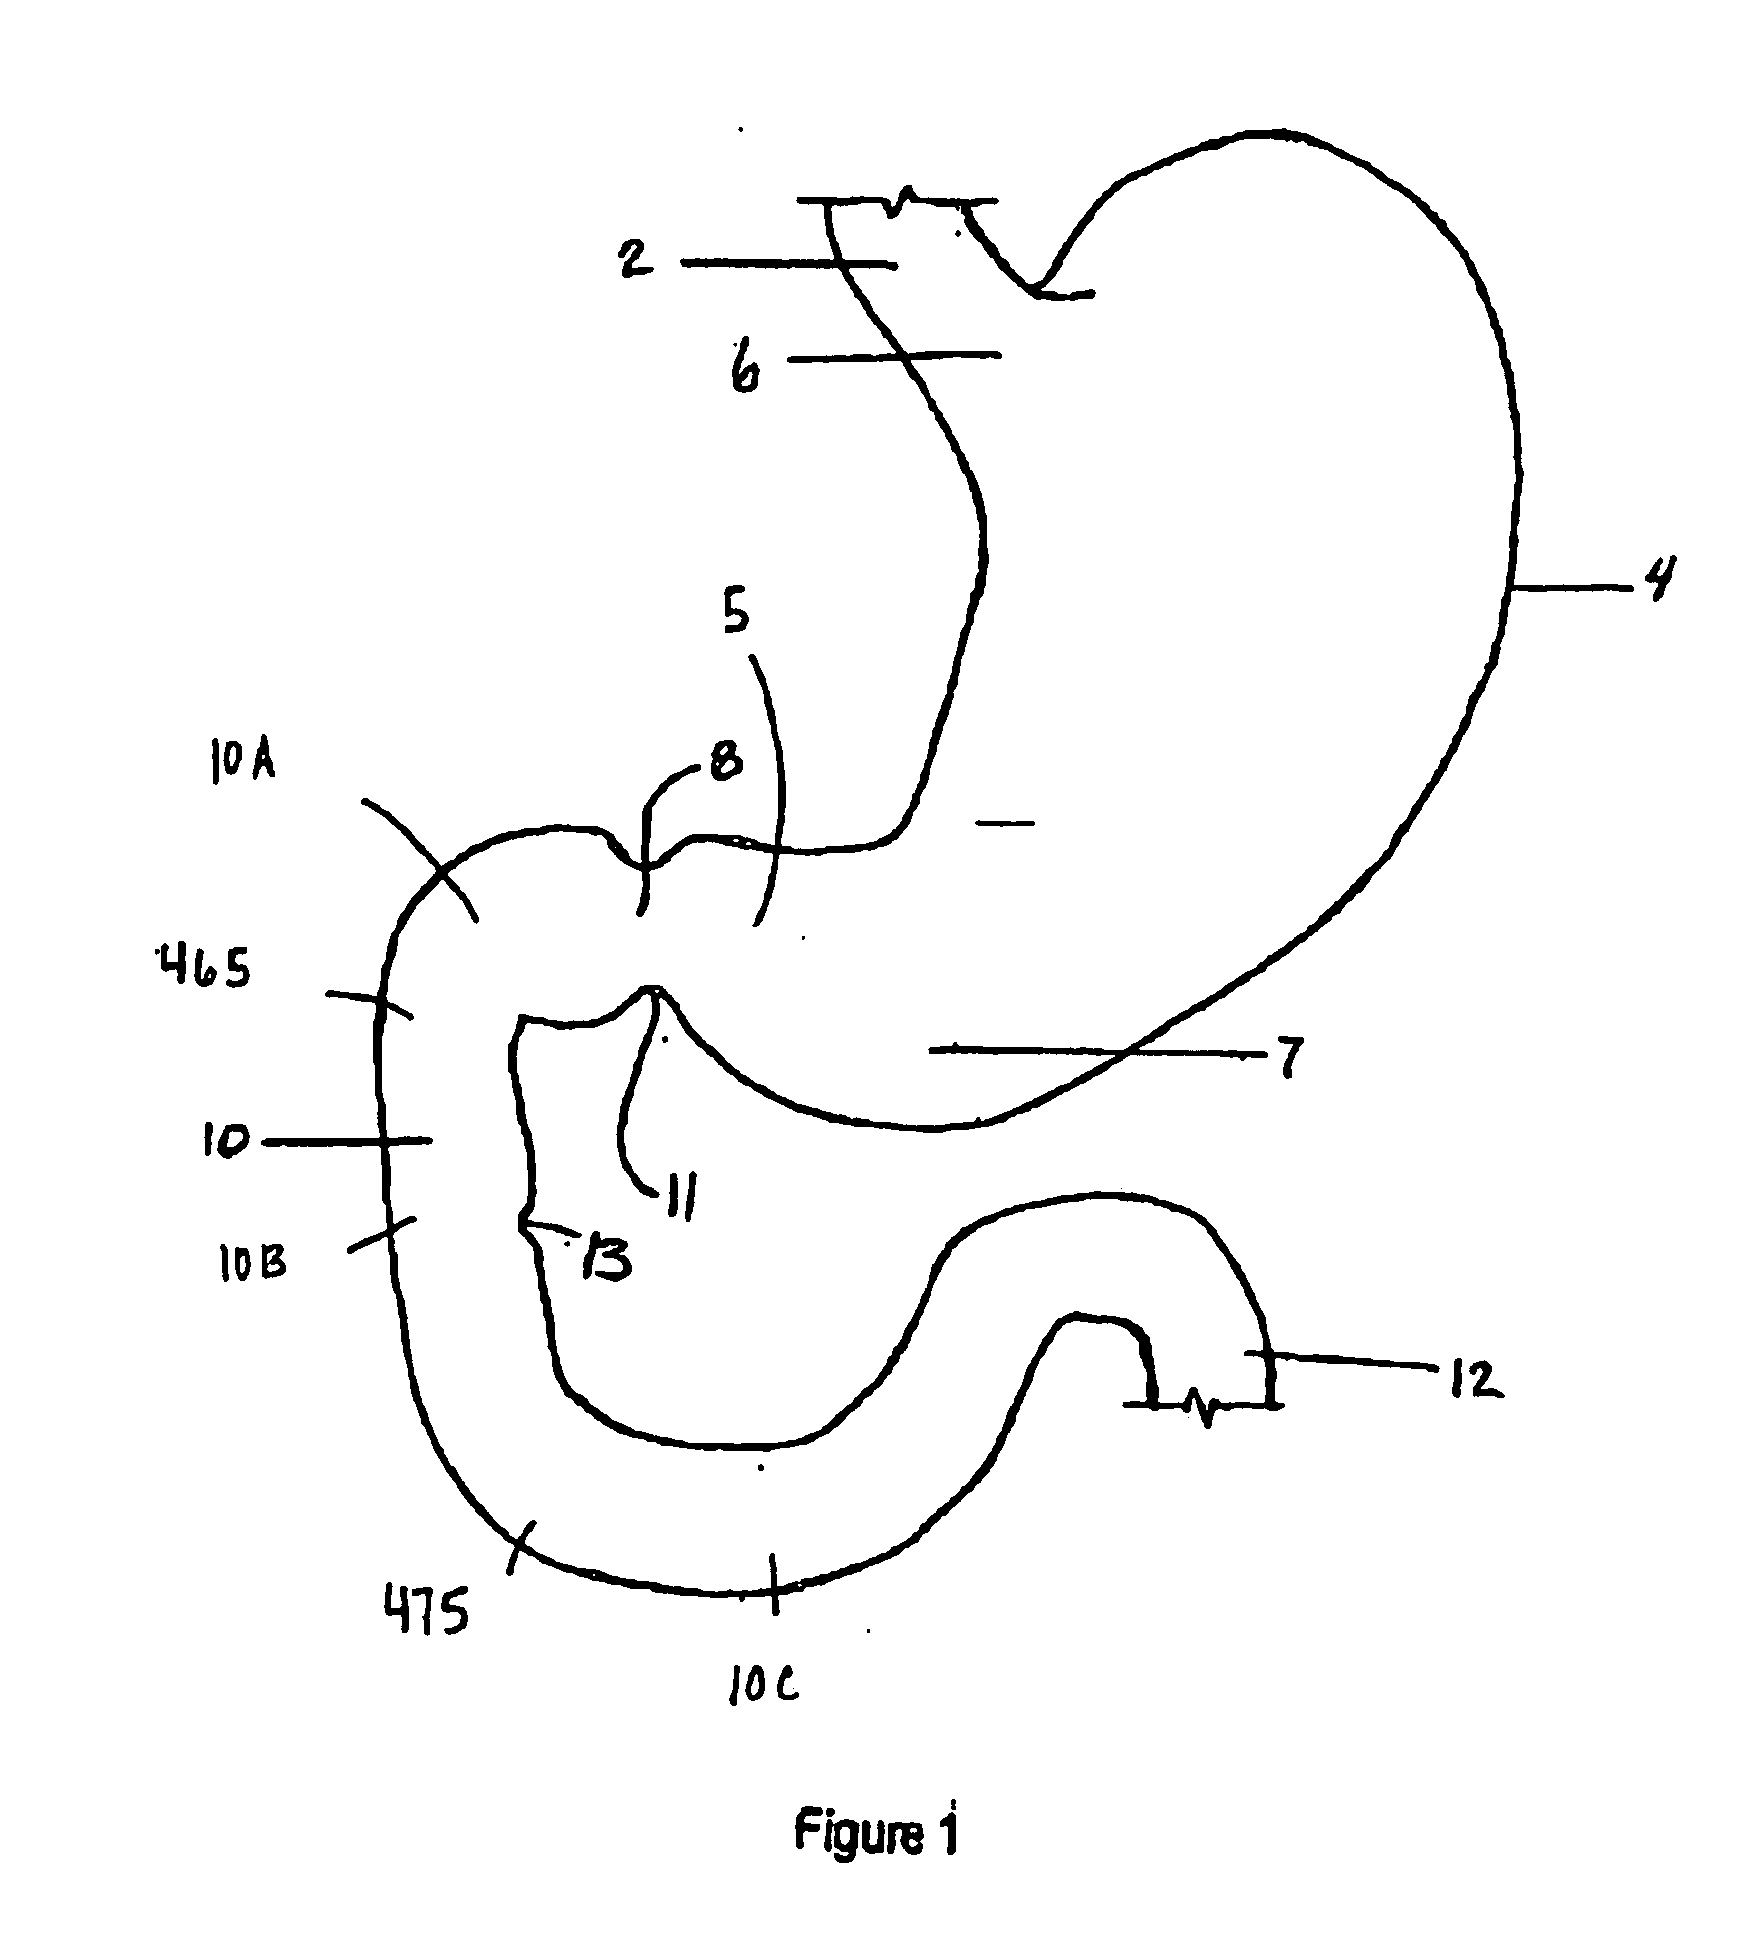 Methods and devices to curb appetite and/or to reduce food intake